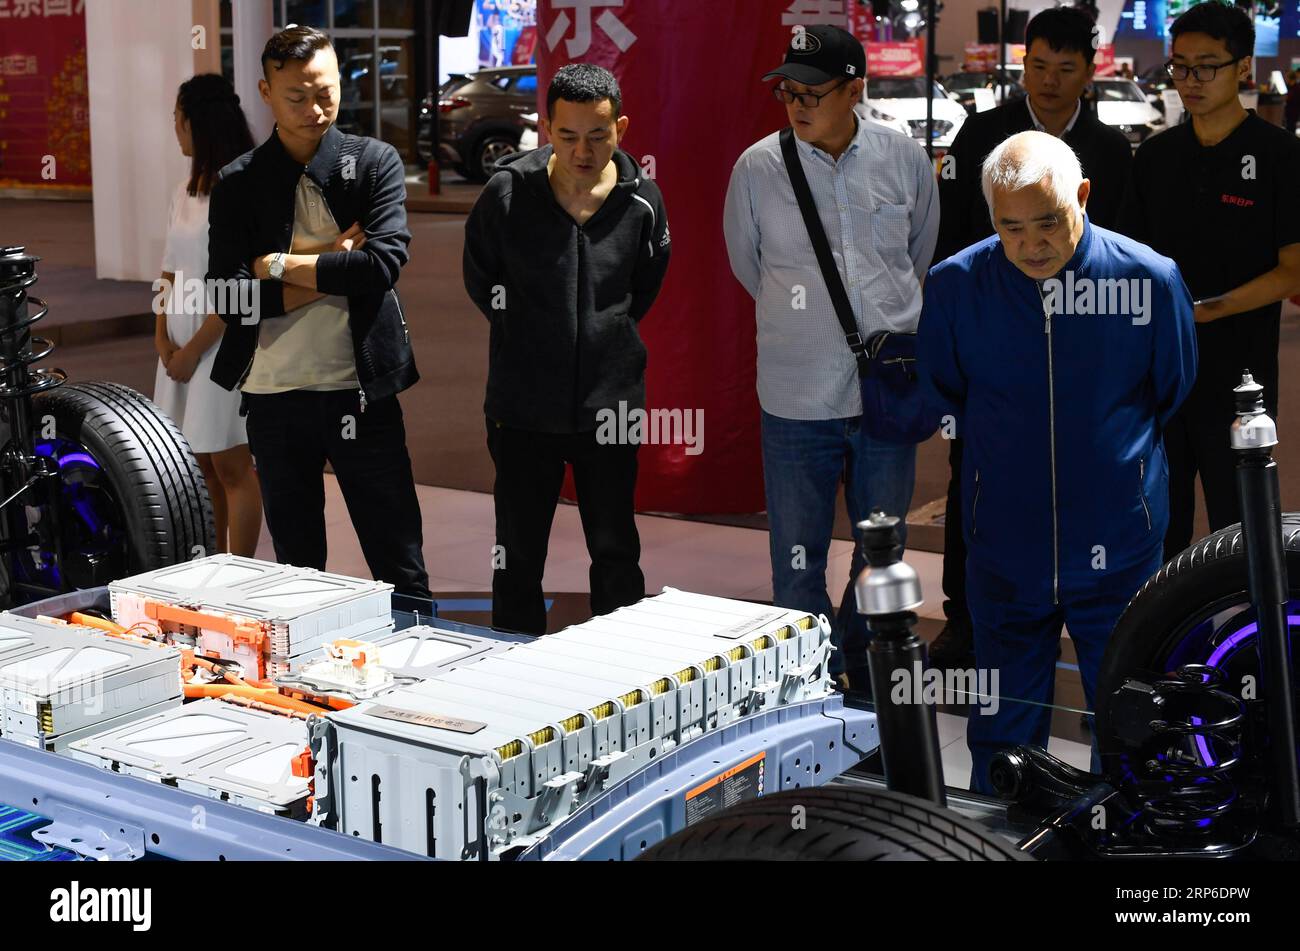 (190110) -- HAIKOU, Jan. 10, 2019 (Xinhua) -- Visitors view the chassis of a car displayed at Haikou New Energy Vehicle Exhibition in Haikou, south China s Hainan Province, Jan. 10, 2019. A total of 197 new energy vehicles were displayed at the exhibition. (Xinhua/Yang Guanyu) CHINA-HAINAN-HAIKOU-NEV-EXHIBITION (CN) PUBLICATIONxNOTxINxCHN Stock Photo